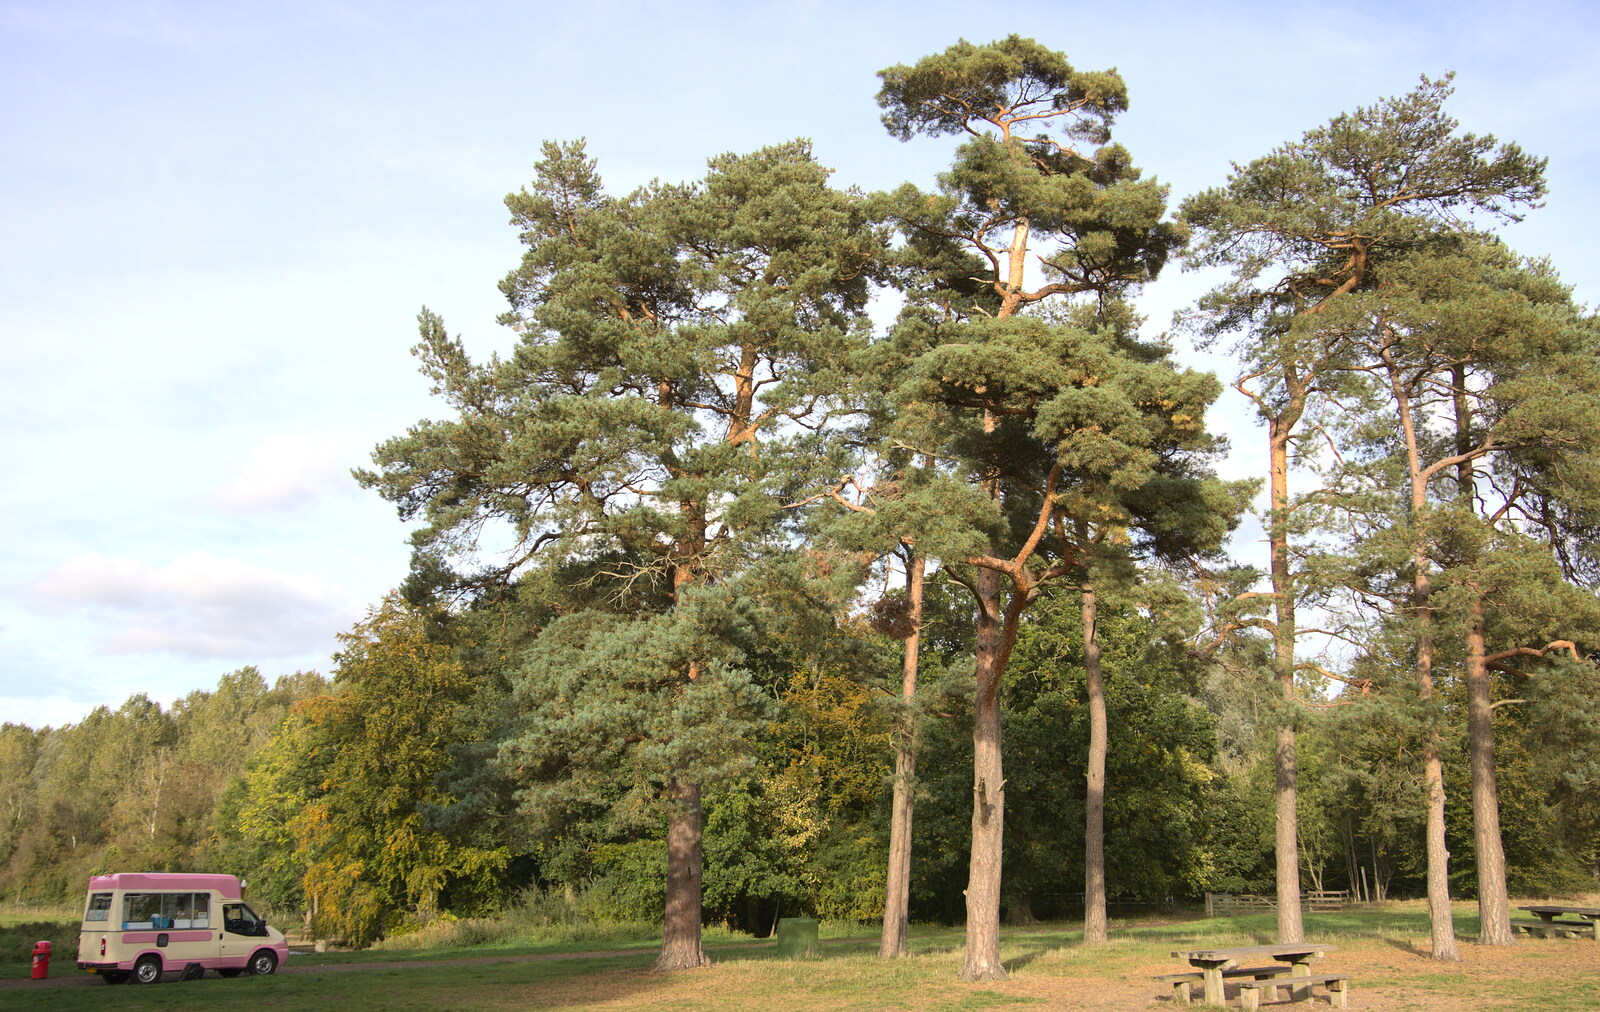 The characteristic pines of the Brecks from Evidence of Autumn: Geocaching on Knettishall Heath, Suffolk - 7th October 2018